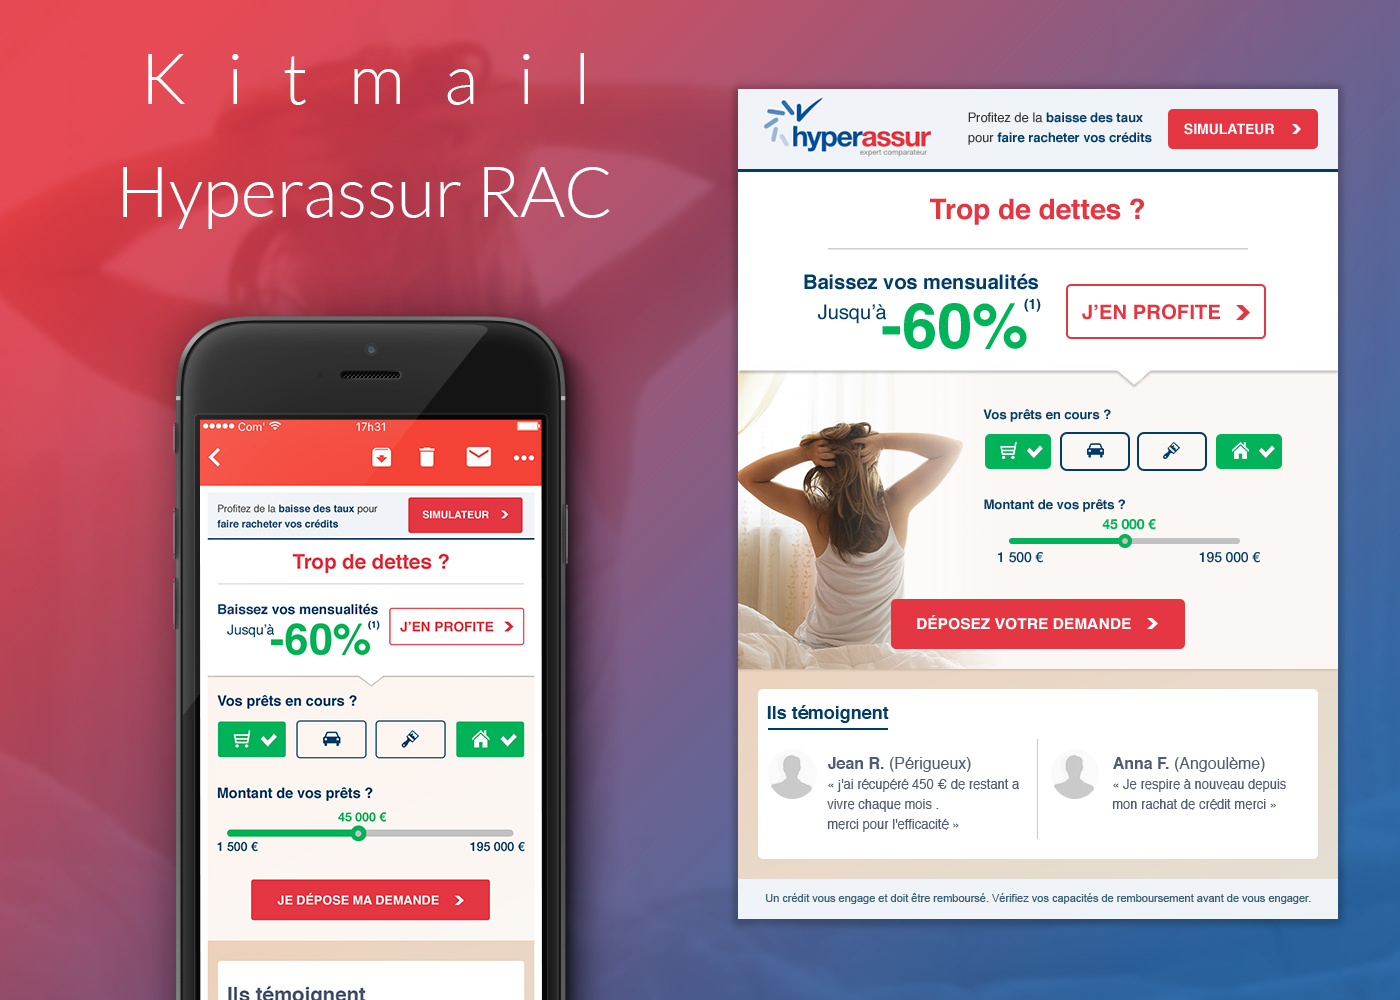 Responsive email